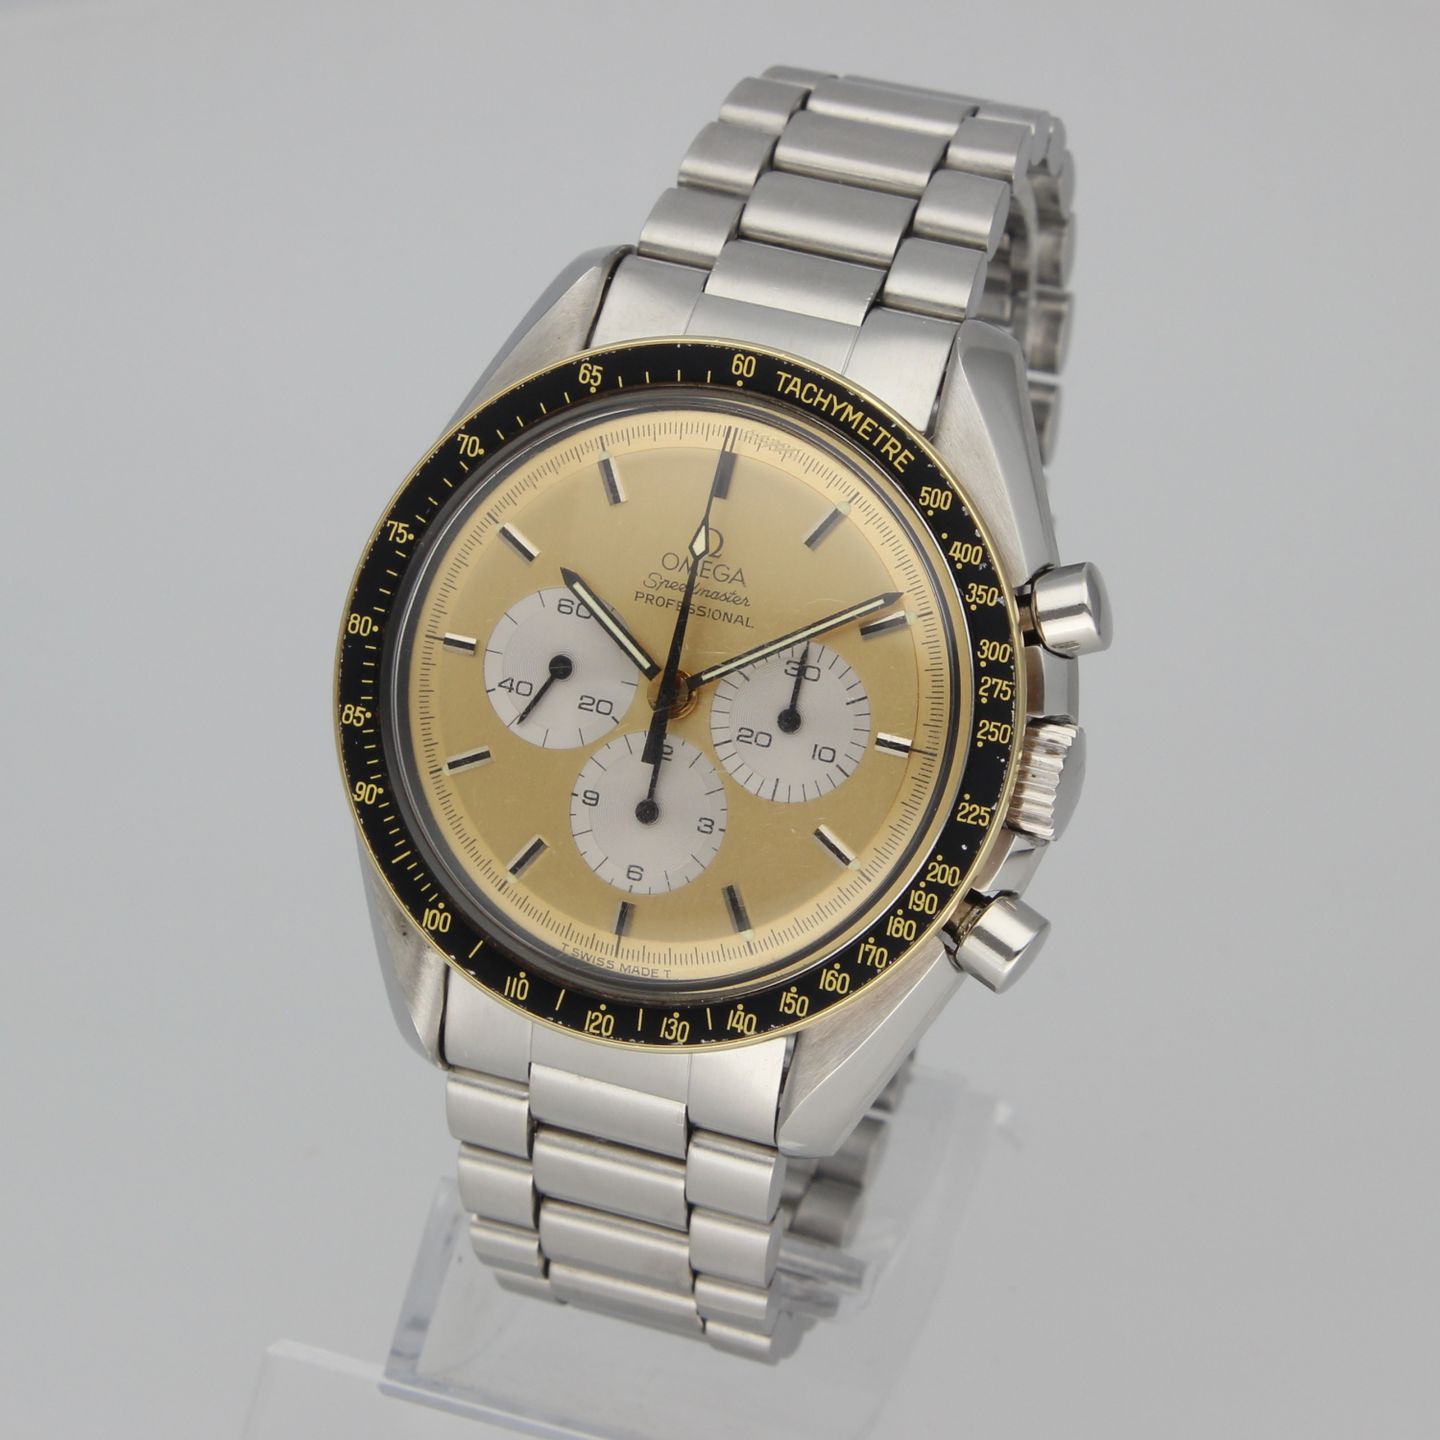 Omega Speedmaster Professional Moonwatch DD 145.0022 CHAMP (1985) - Champagne wijzerplaat 42mm Staal (3/8)